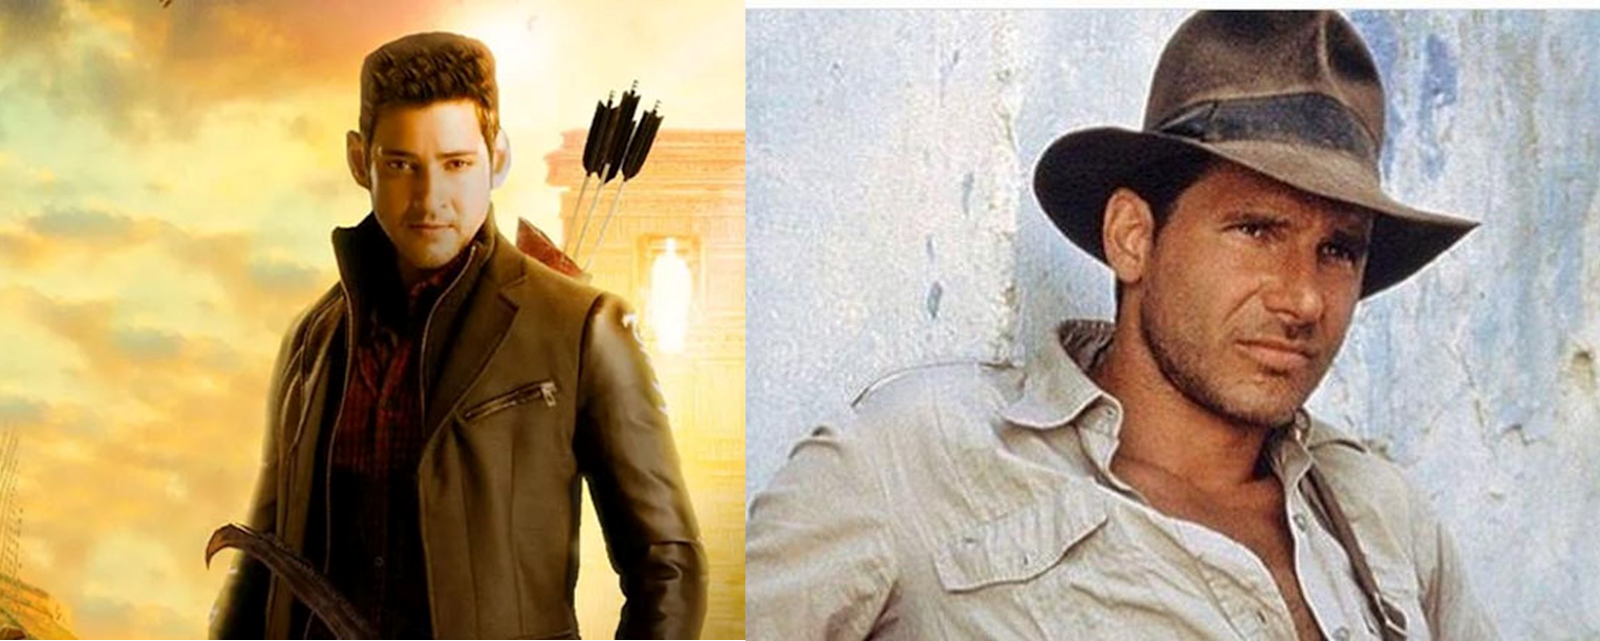 Allu Arjun to Yash; South actors who can nail Indiana Jones adventures in their unique